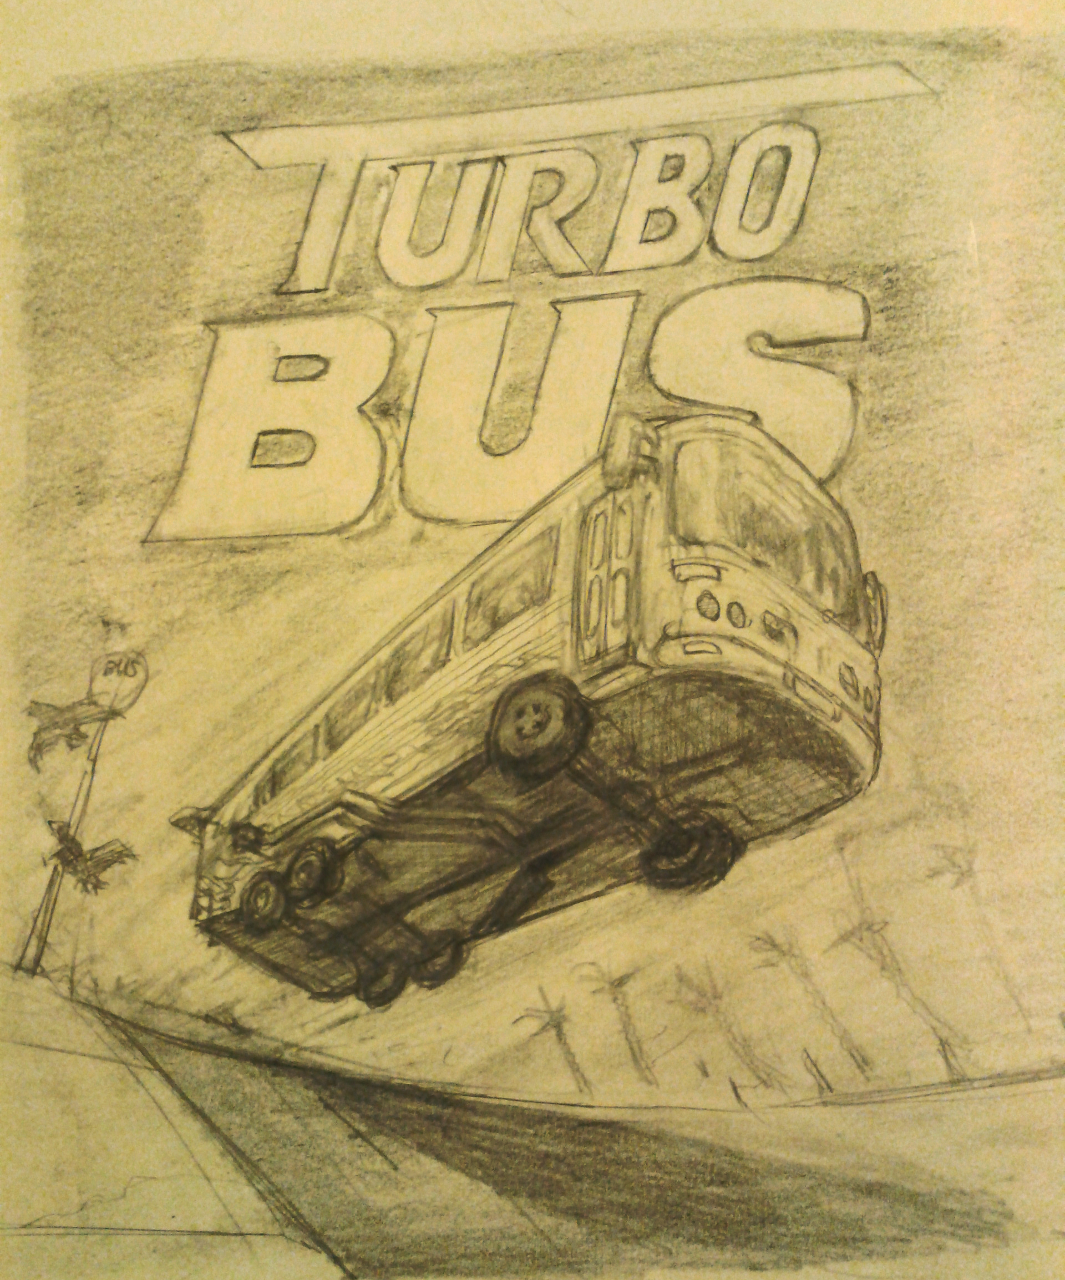 Image of cover concept art for Turbo Bus, (so far) fictional pc game.